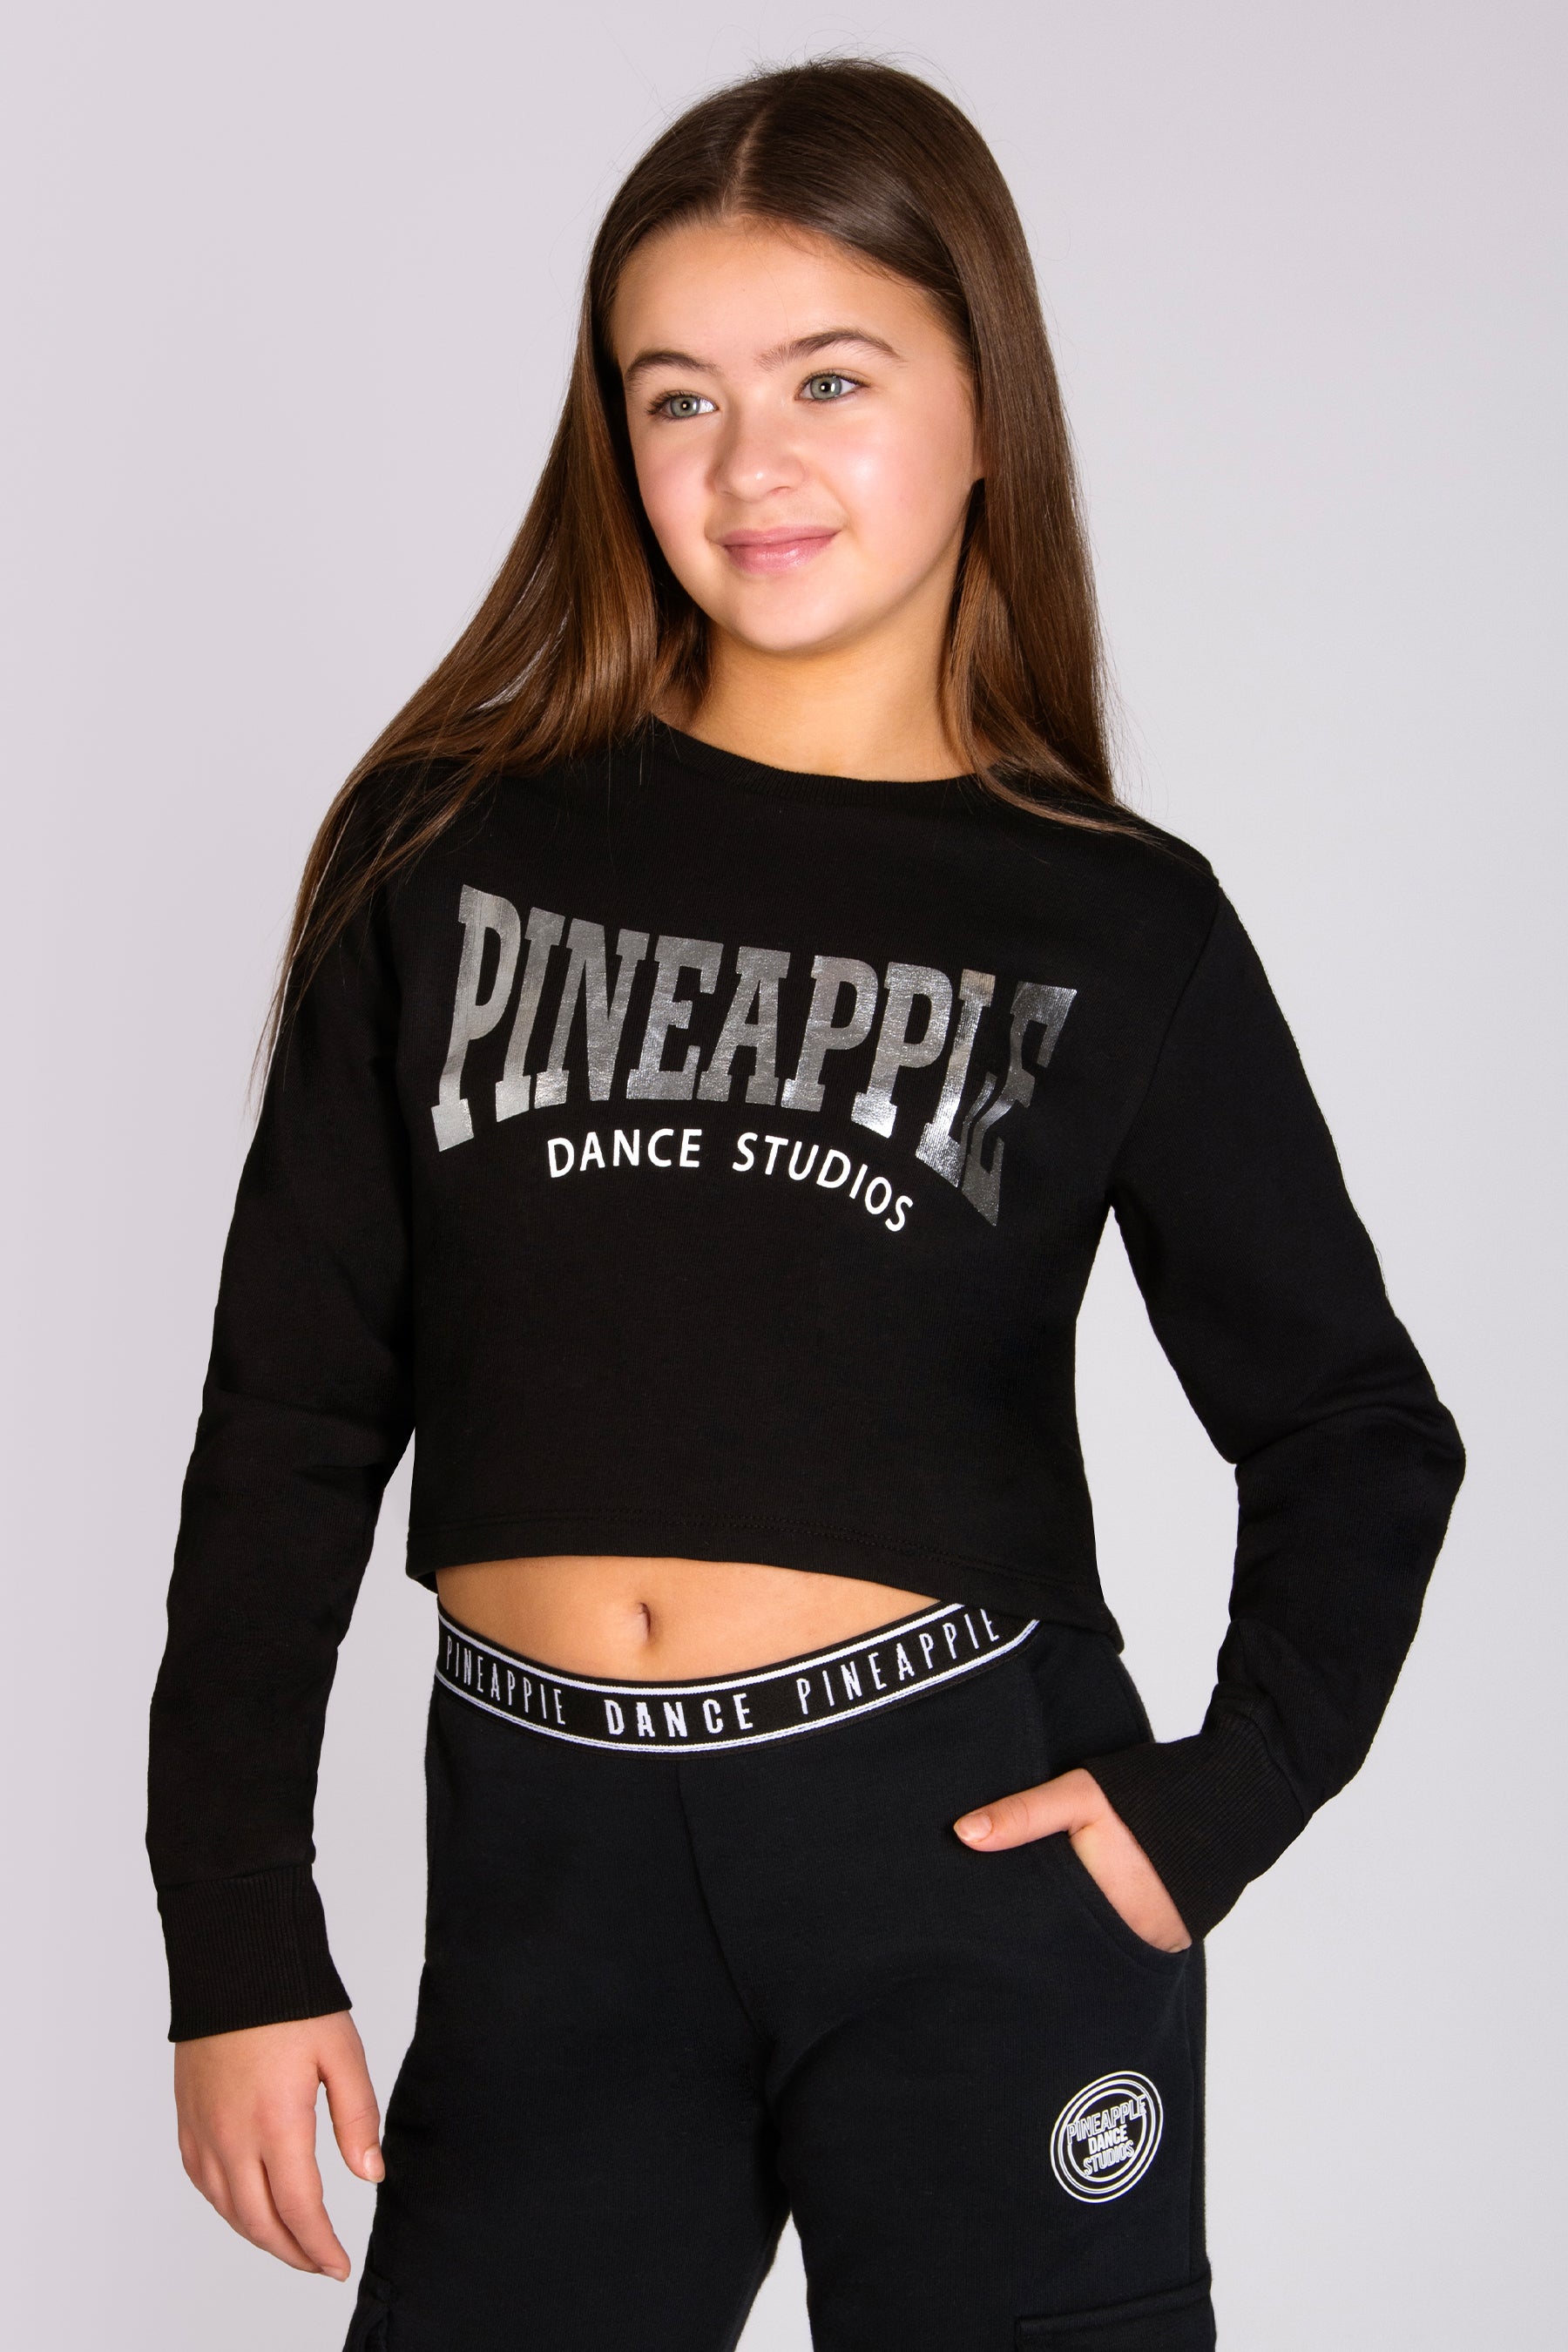 Shop Pineapple  Women's and Girls' Leisure & Dance Clothing